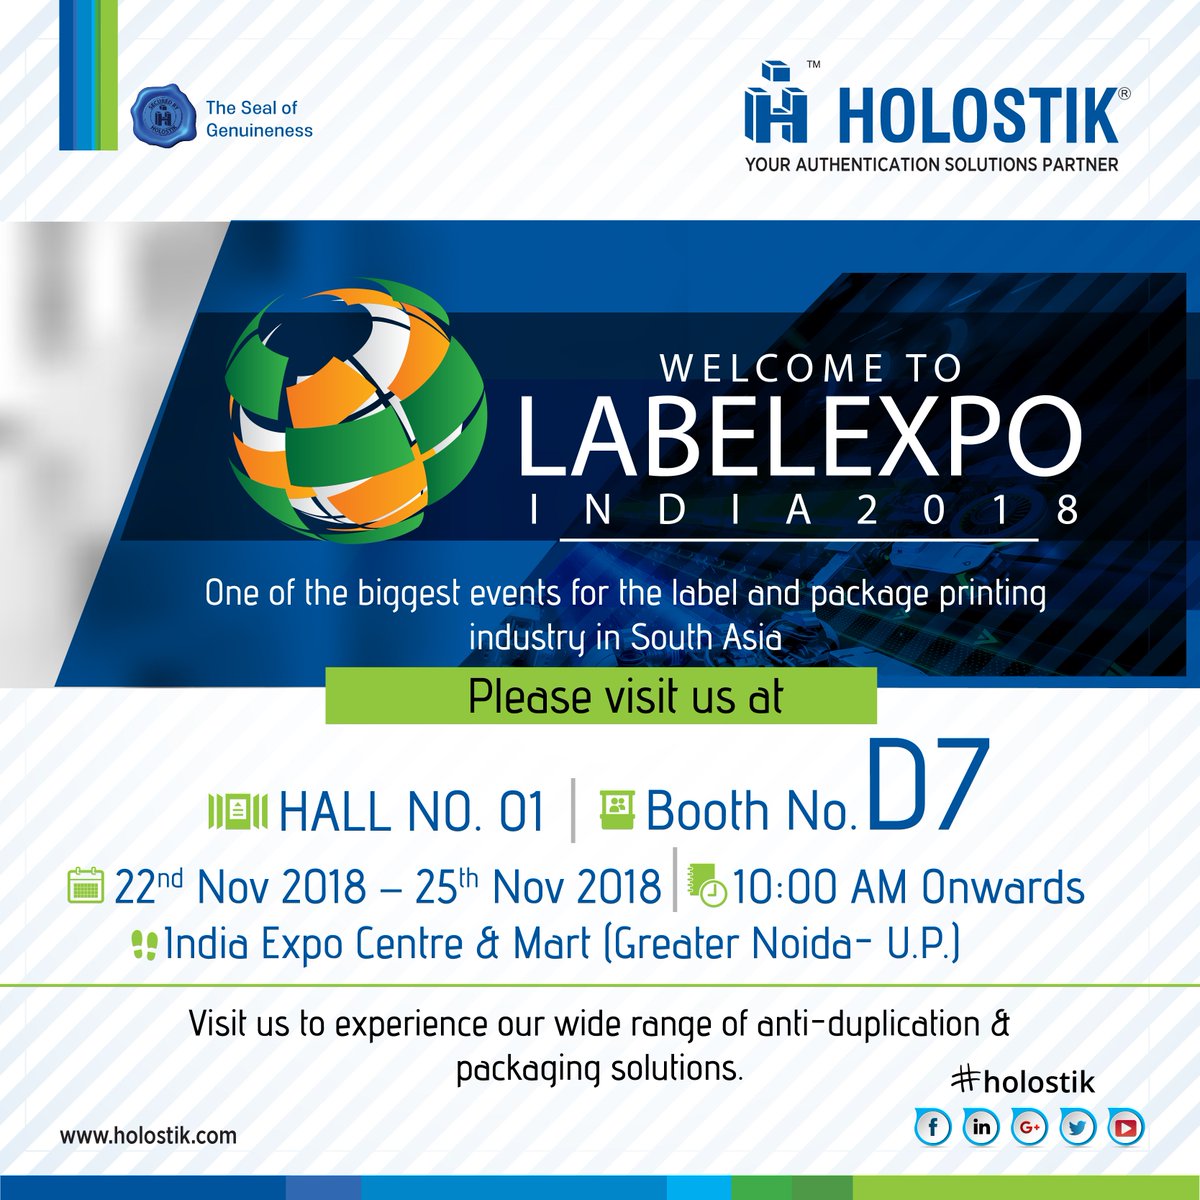 VISIT US TODAY!

Holostik is displaying its cutting-edge #antiduplication and #packagingsolutions at #LABELEXPOINDIA 2018 from 22nd Nov to 25th Nov 2018.

#labels #labelindustry #packagingindustry #packagingmarket #packaging #printing #labelexpo2018 #labelexpo #Holostik